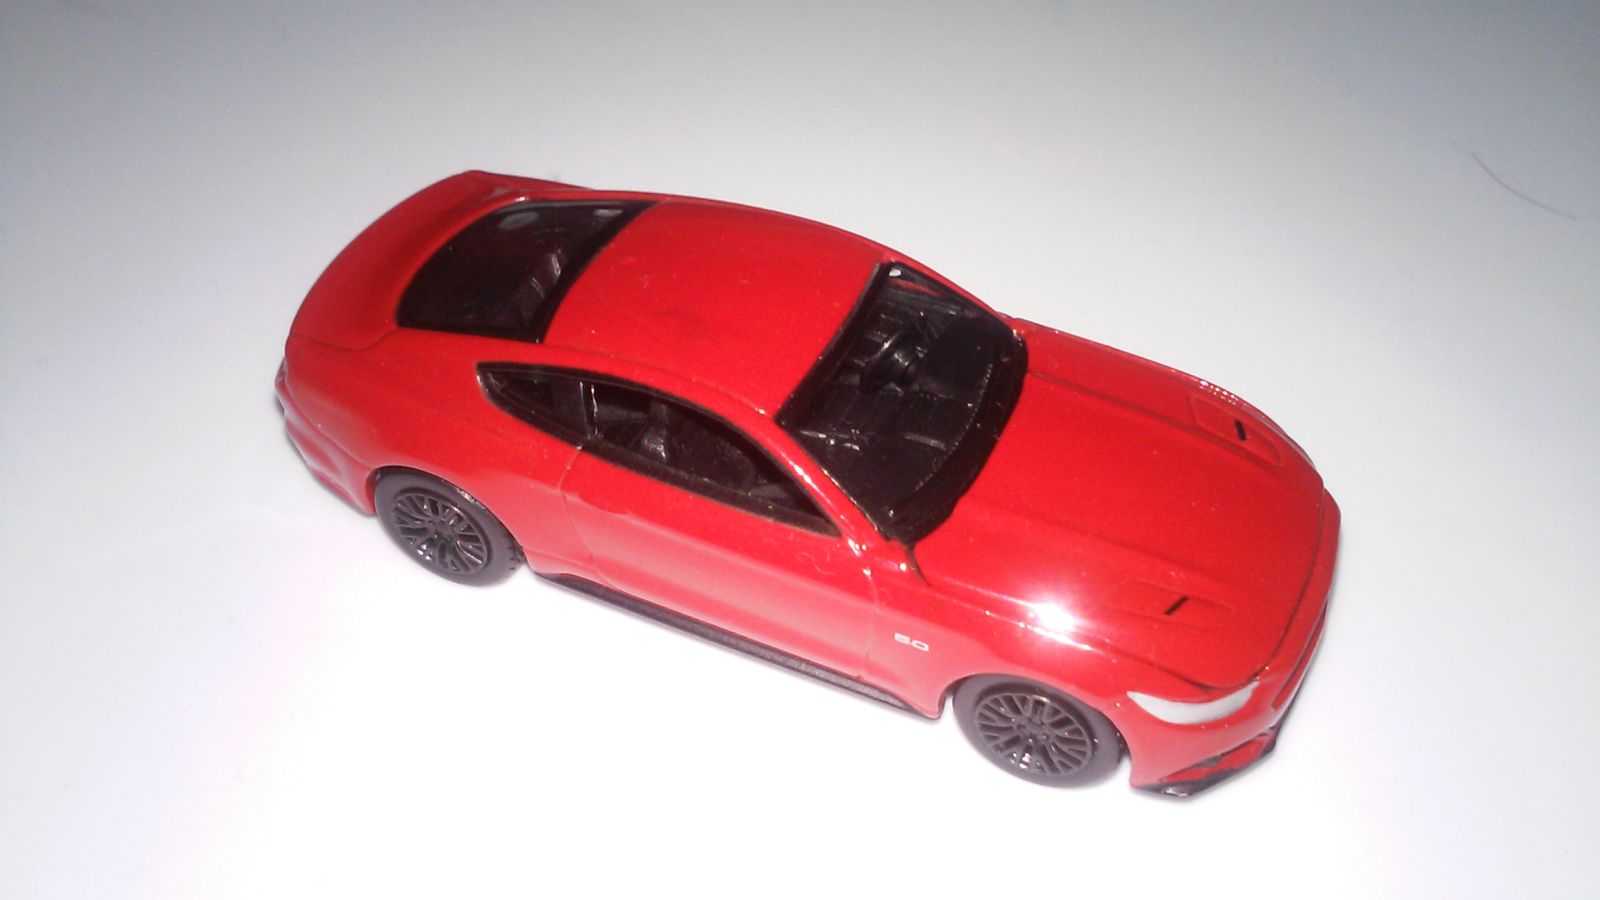 Illustration for article titled Auto World 1/64 2015 Ford Mustang